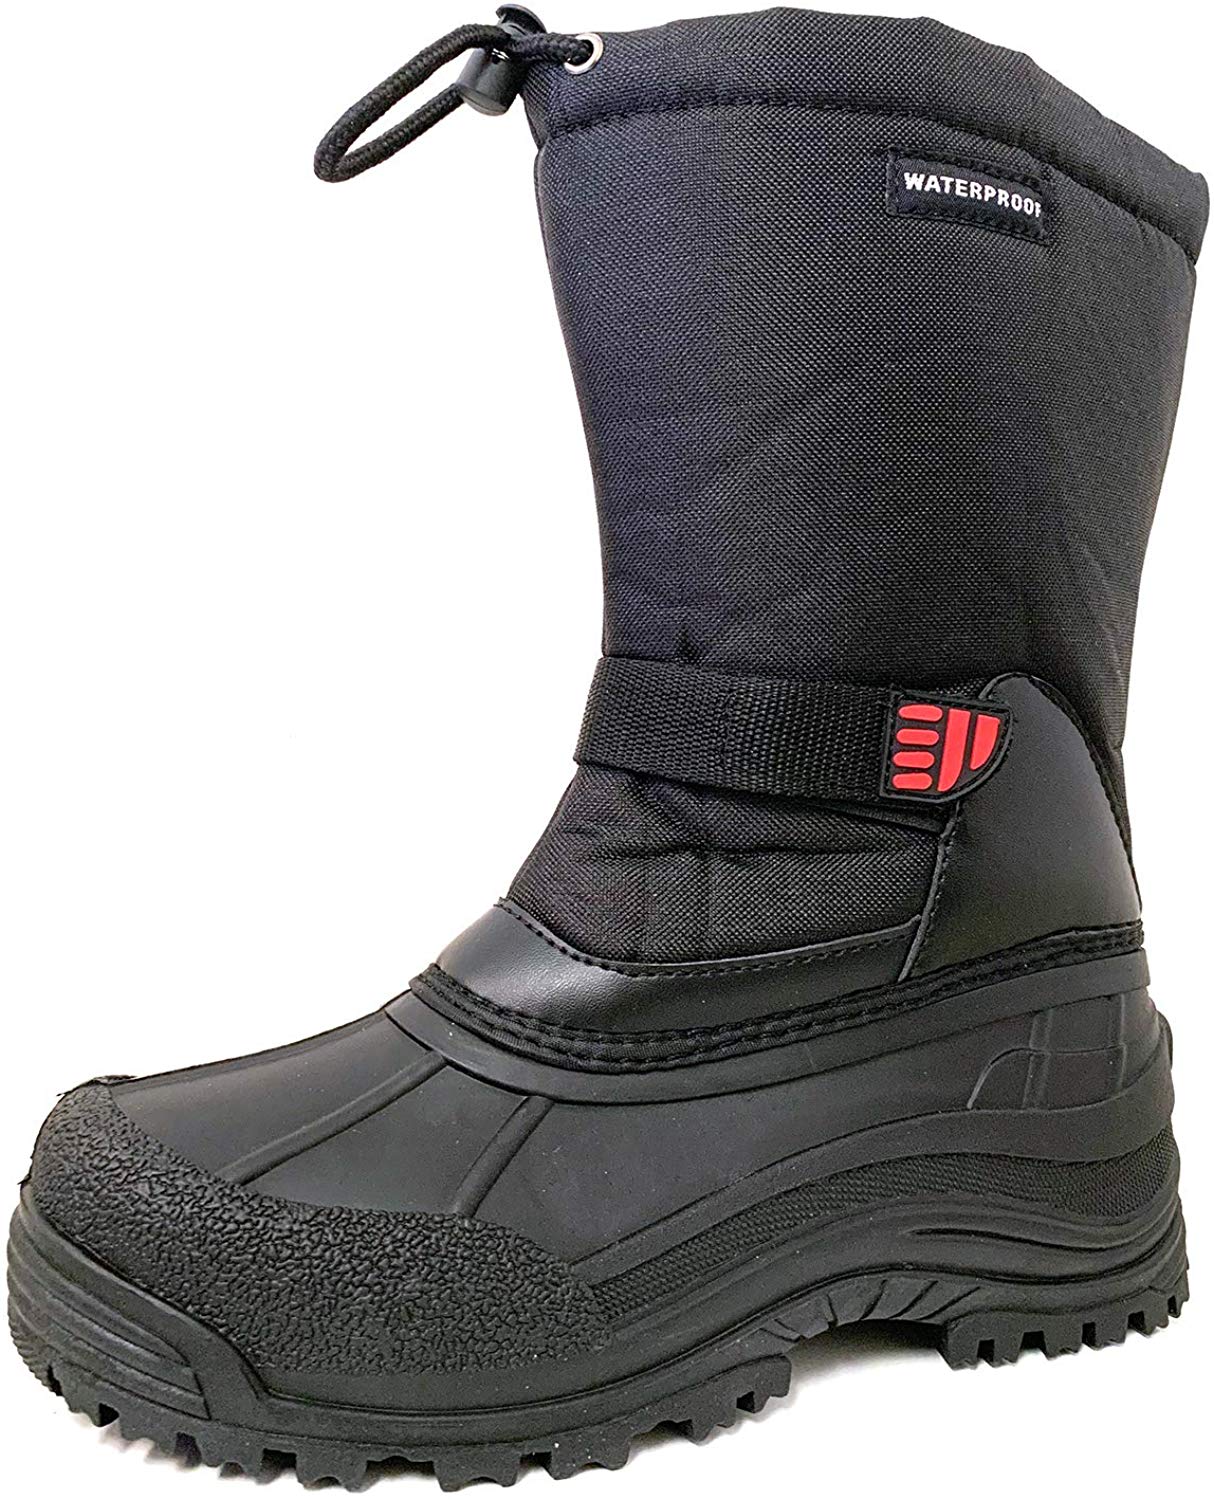 Men's Snow Boots - image 1 of 5